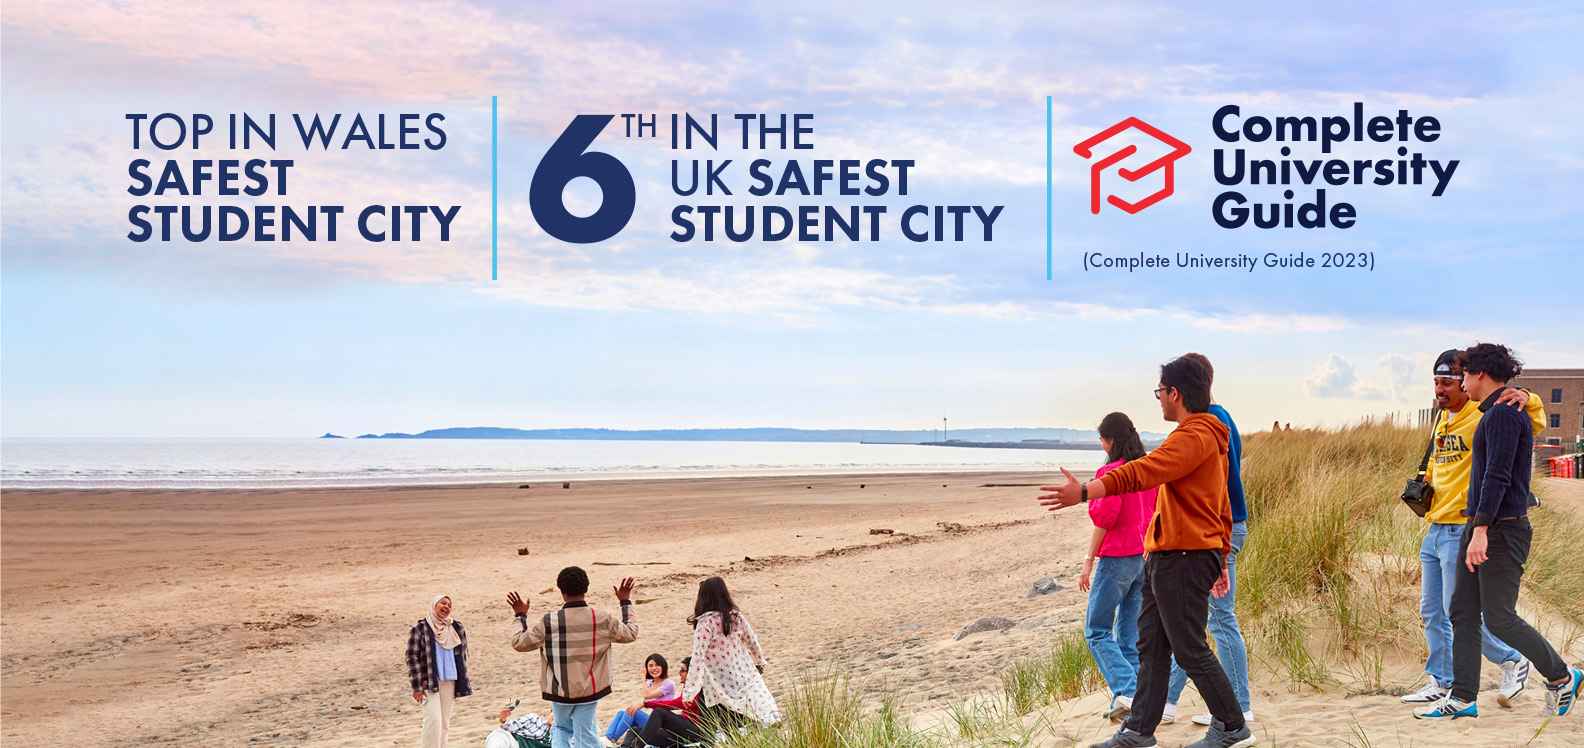 A group of students walking on the beach and the Complete University Guide logo. TEXT: Top in Wales Safest Student City (Complete University Guide 2023) | 6th in the UK Safest Student City (Complete University Guide 2023)